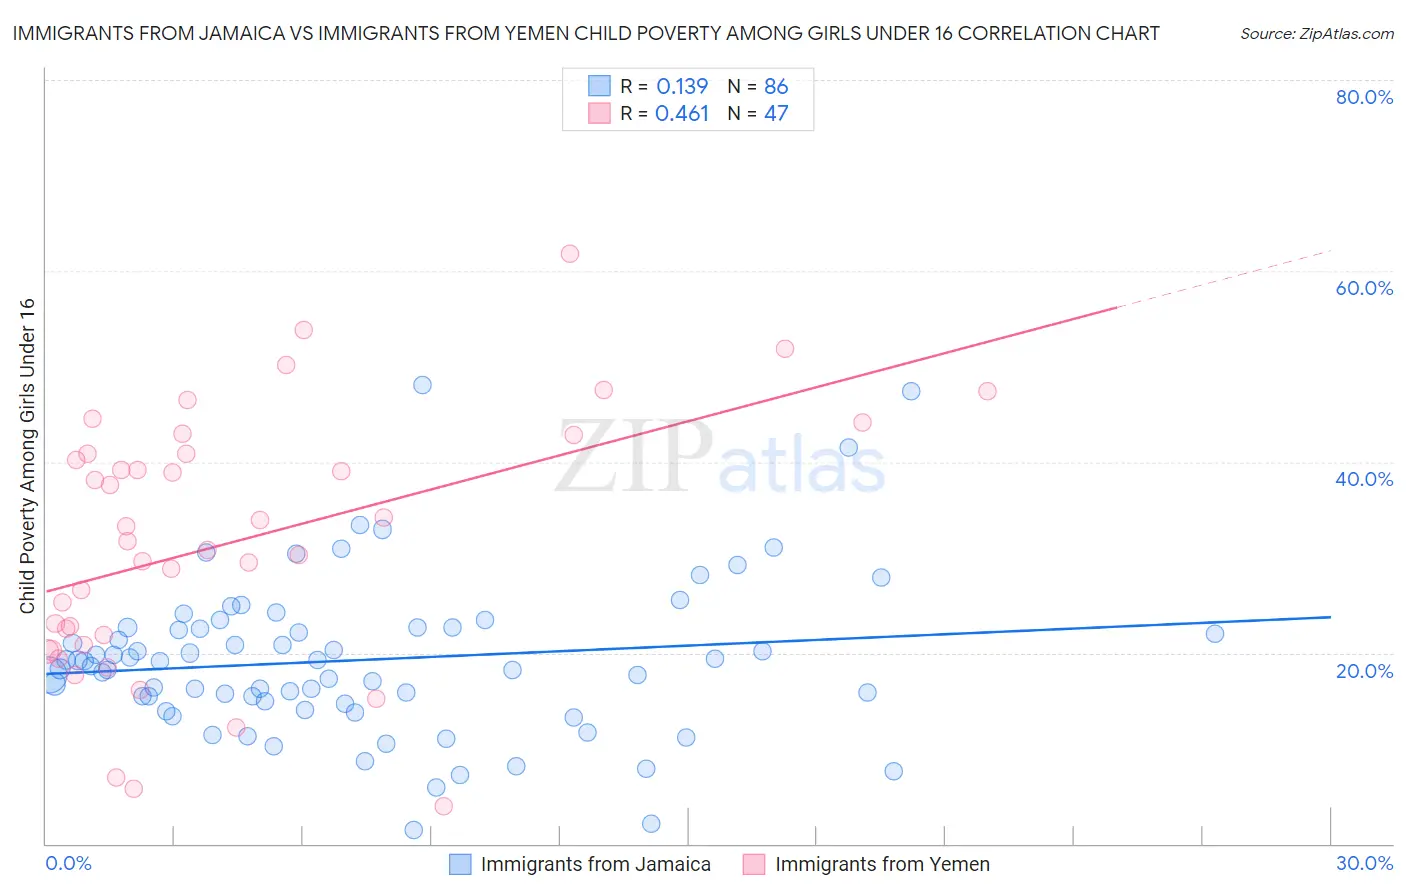 Immigrants from Jamaica vs Immigrants from Yemen Child Poverty Among Girls Under 16